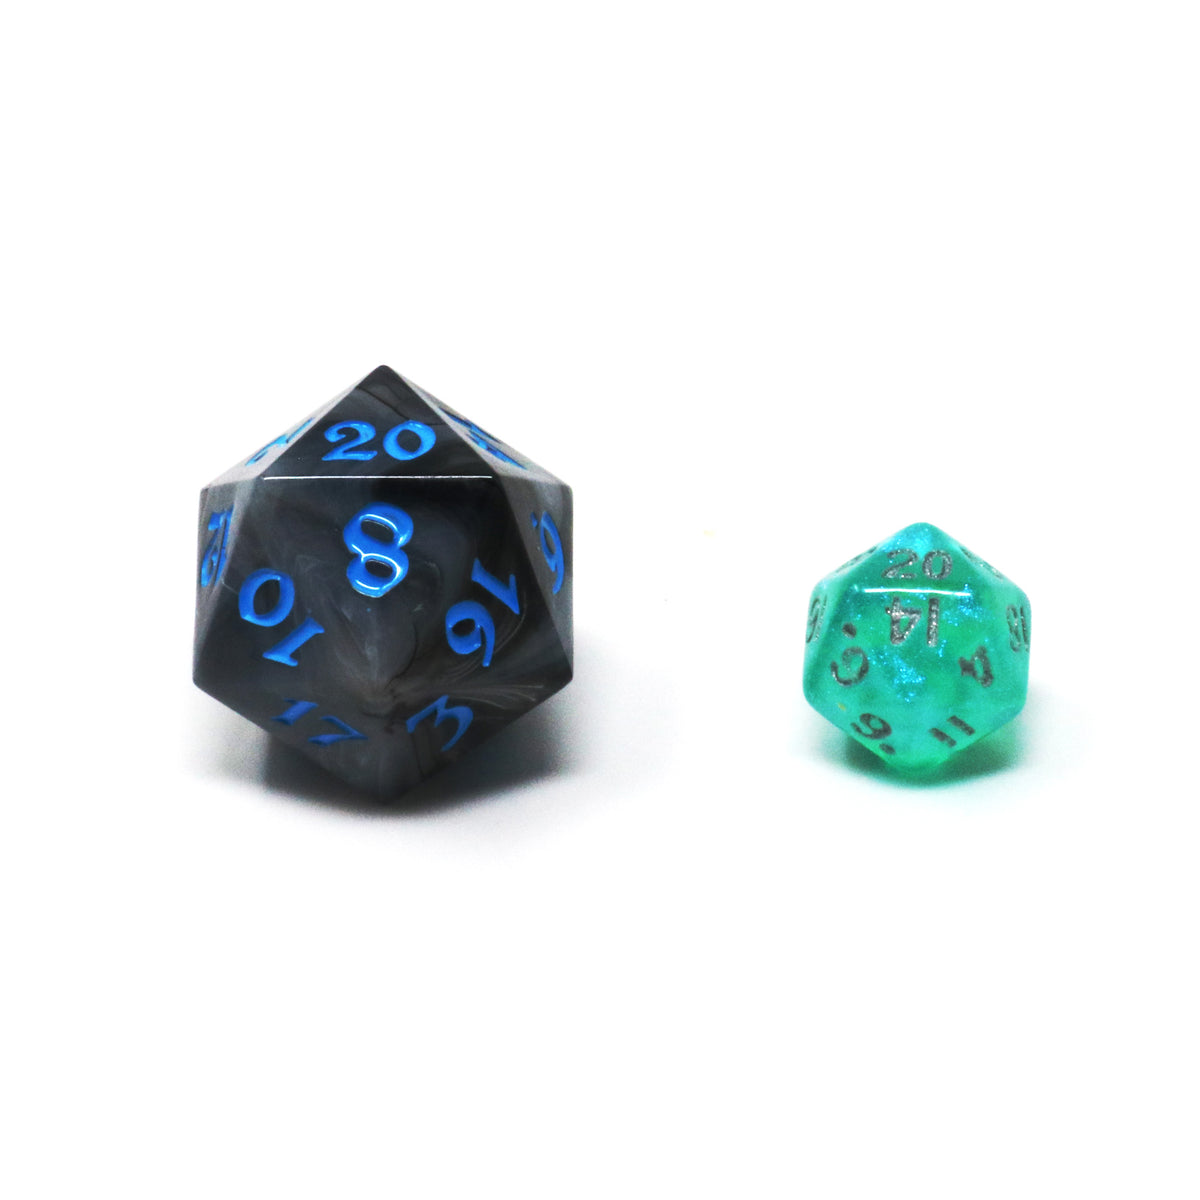 Size comparison image showing a regular sized d20 and a smaller critling d20